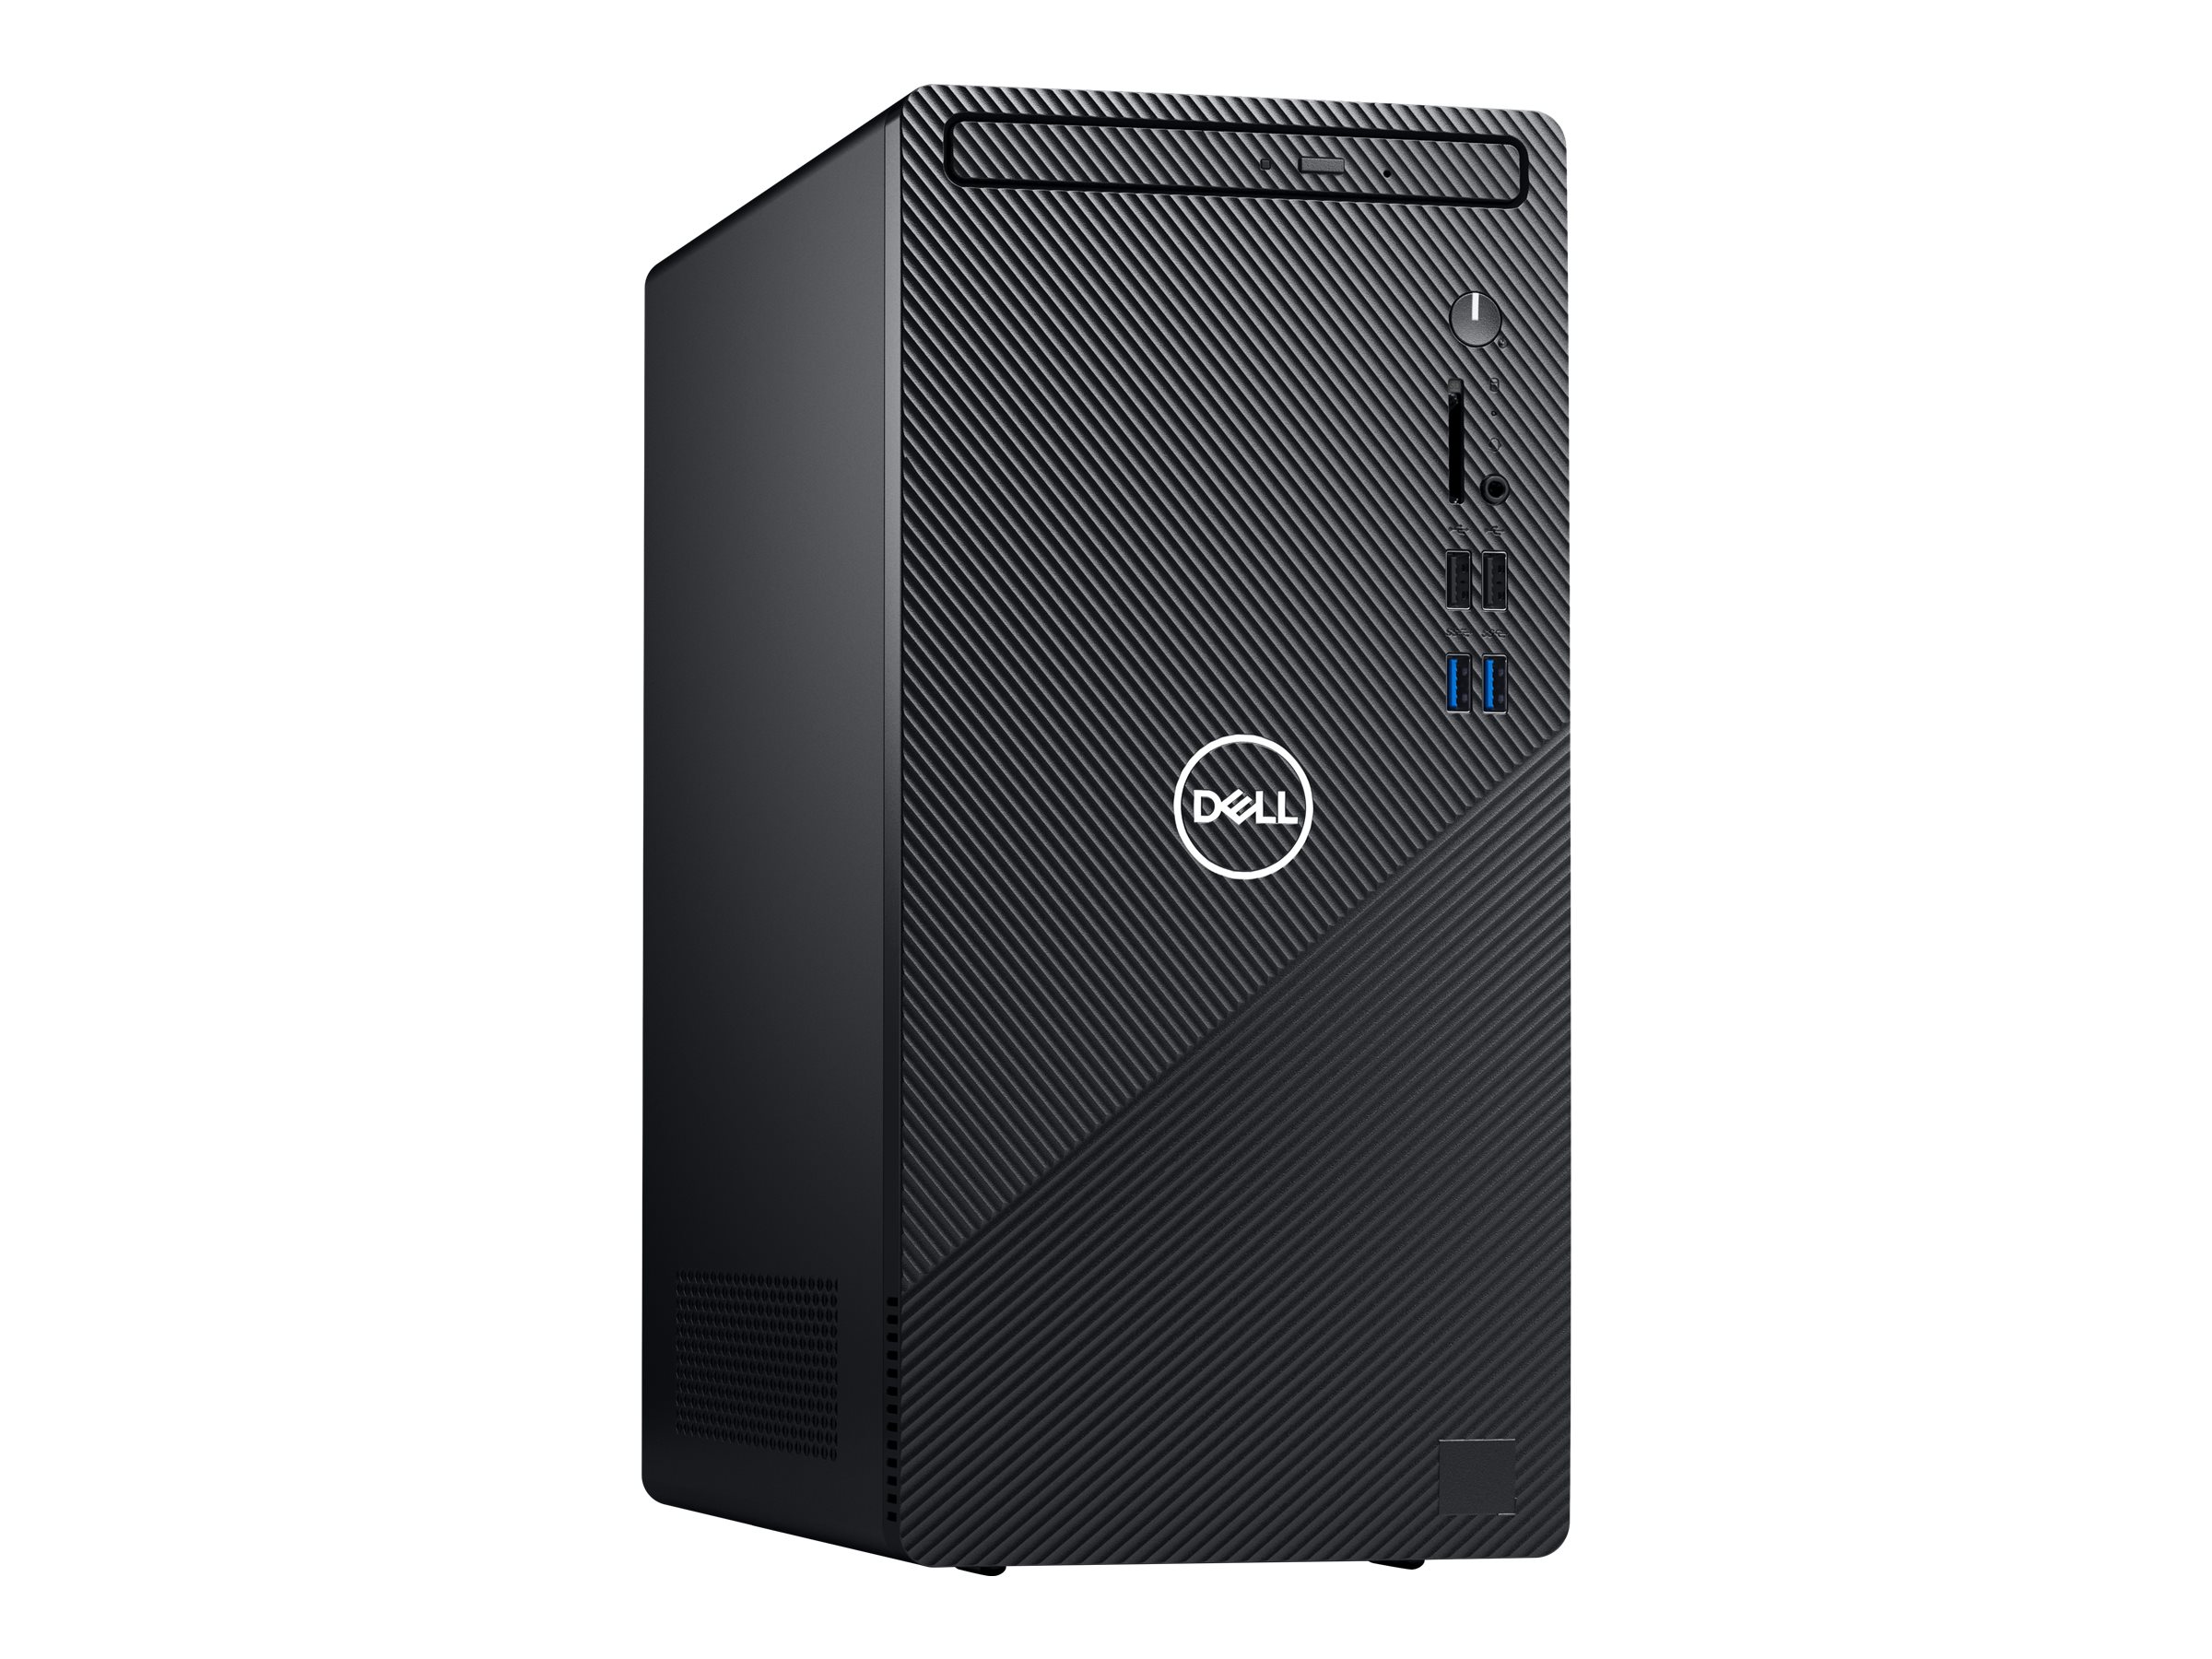 Dell Inspiron 3880 - Compact desktop - Core i7 10700 / 2.9 GHz - RAM 8 GB - SSD 512 GB - NVMe - DVD-Writer - UHD Graphics 630 - GigE - WLAN: Bluetooth, 802.11a/b/g/n/ac - Win 10 Home 64-bit - monitor: none - black - image 4 of 6